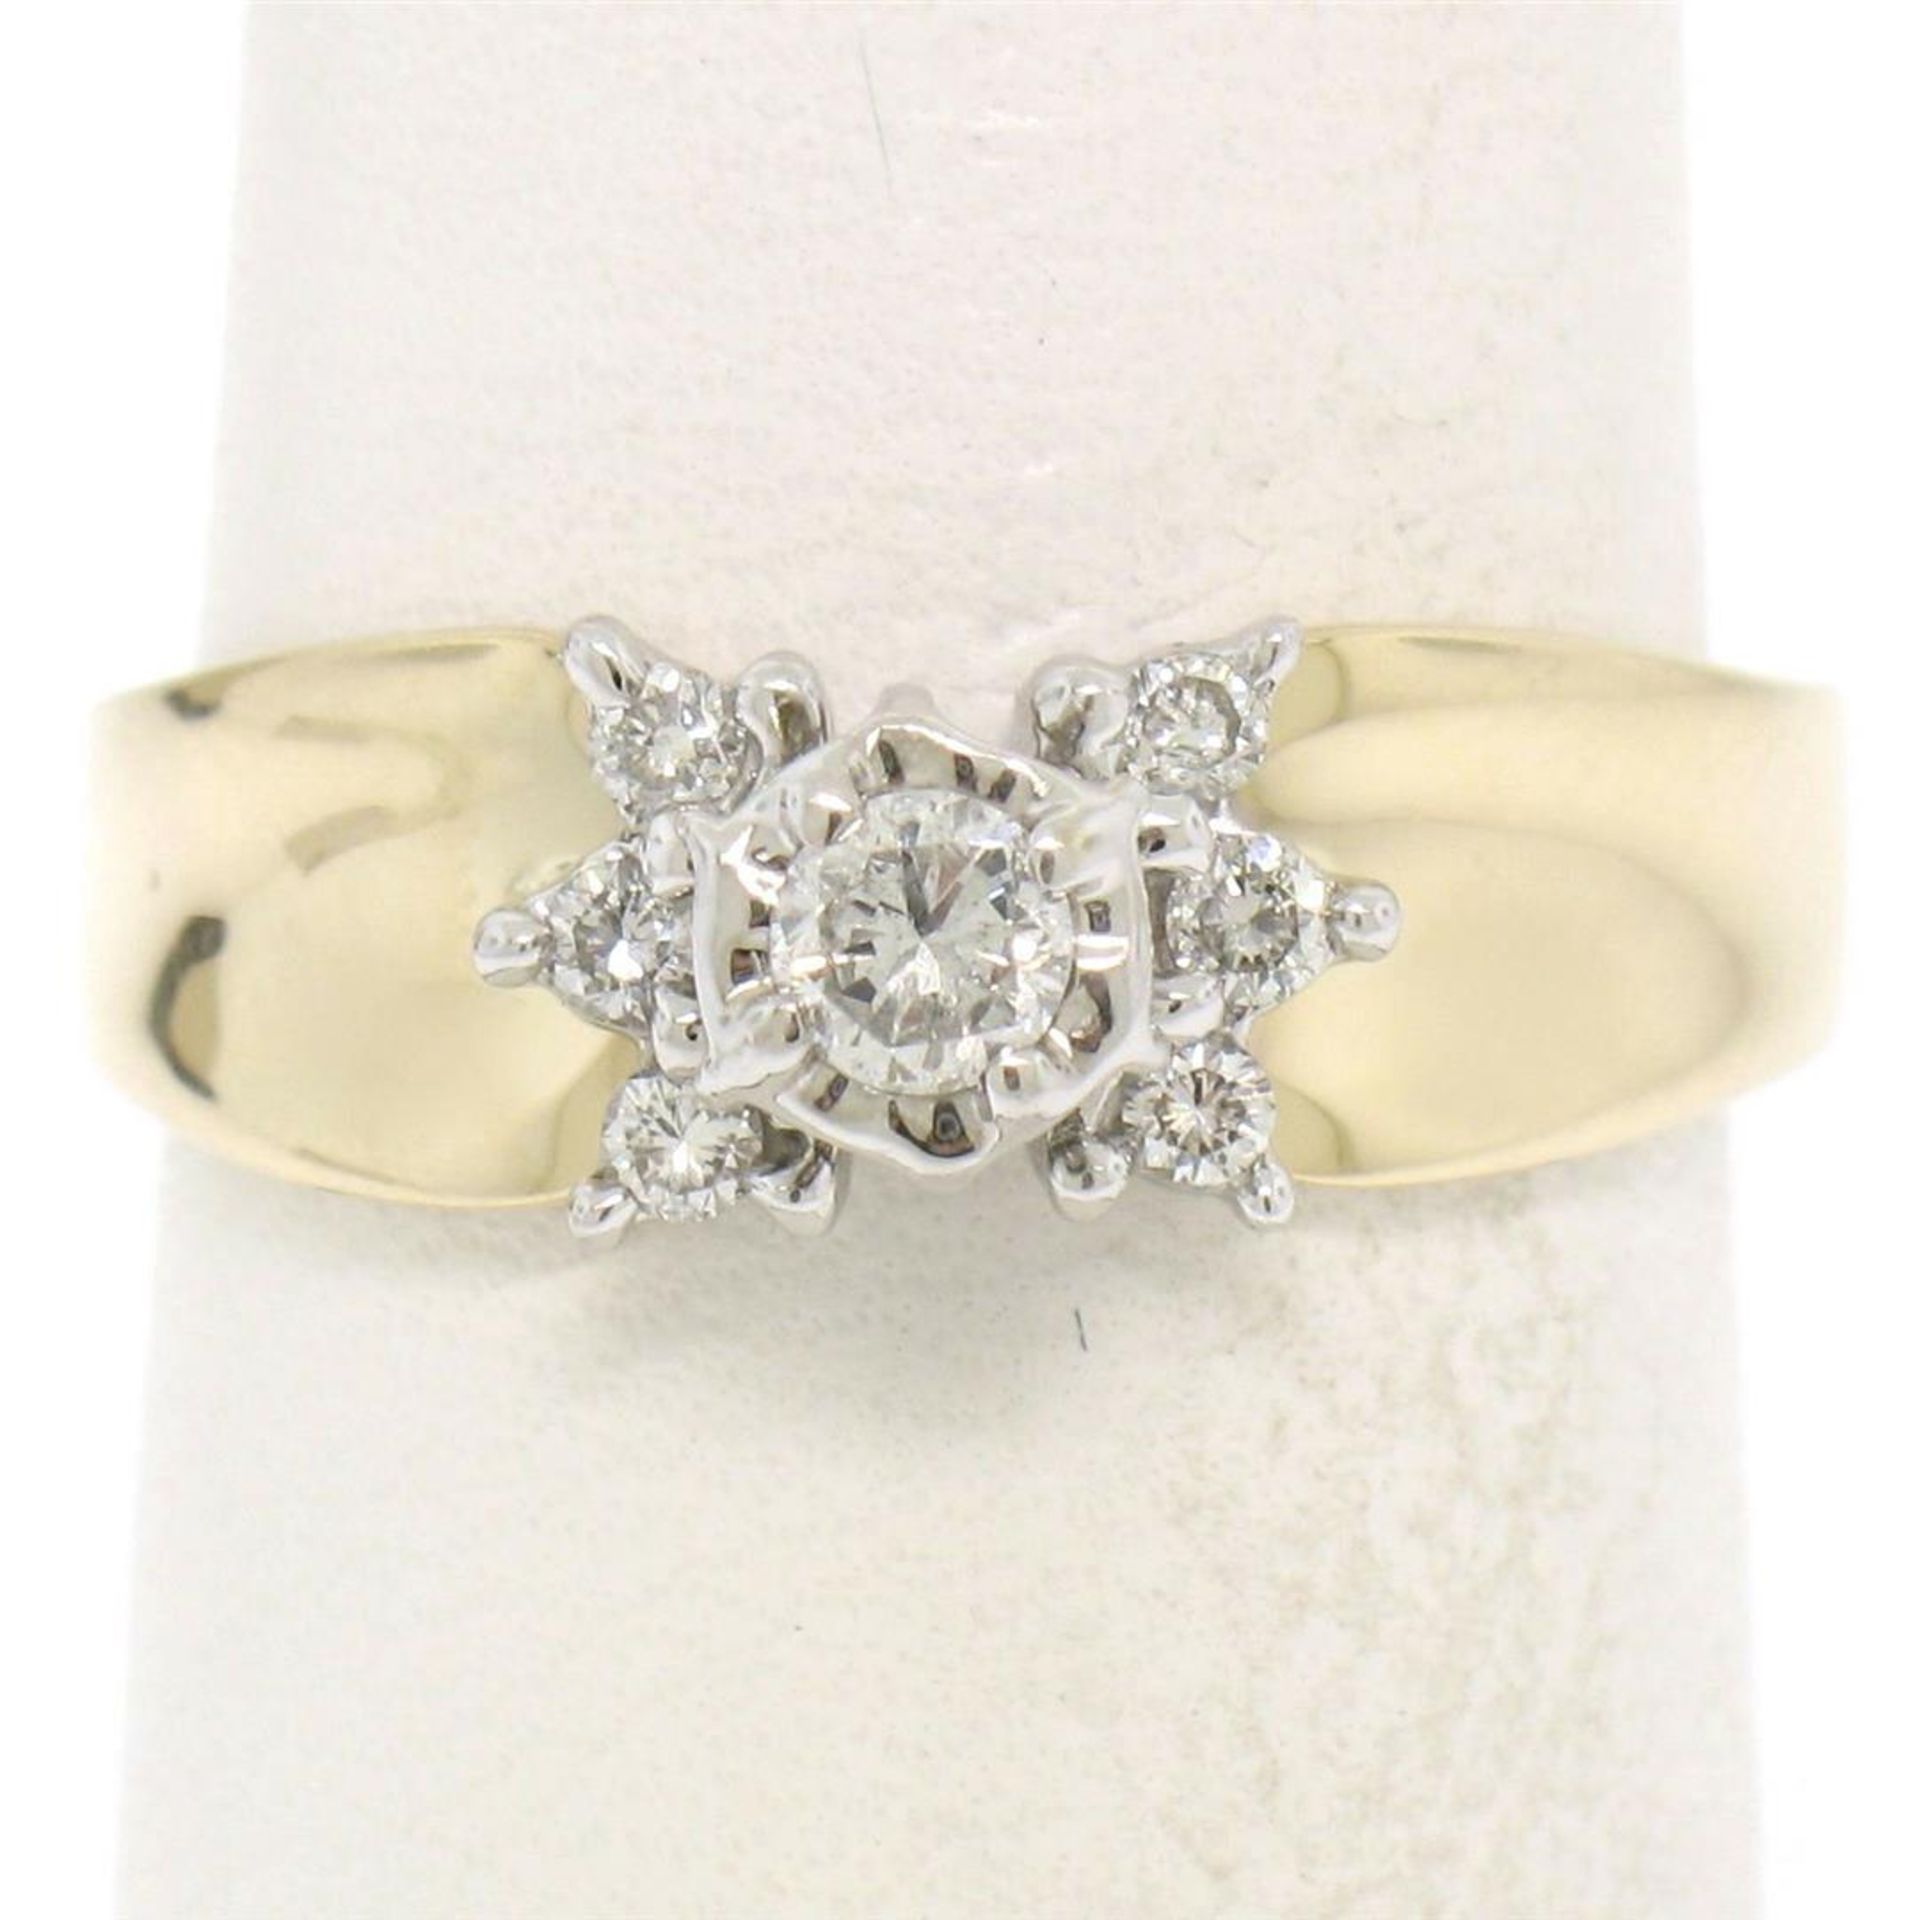 14k Two Tone Gold 0.30 ctw Illusion Set Solitaire Diamond Engagement Ring - Image 3 of 8